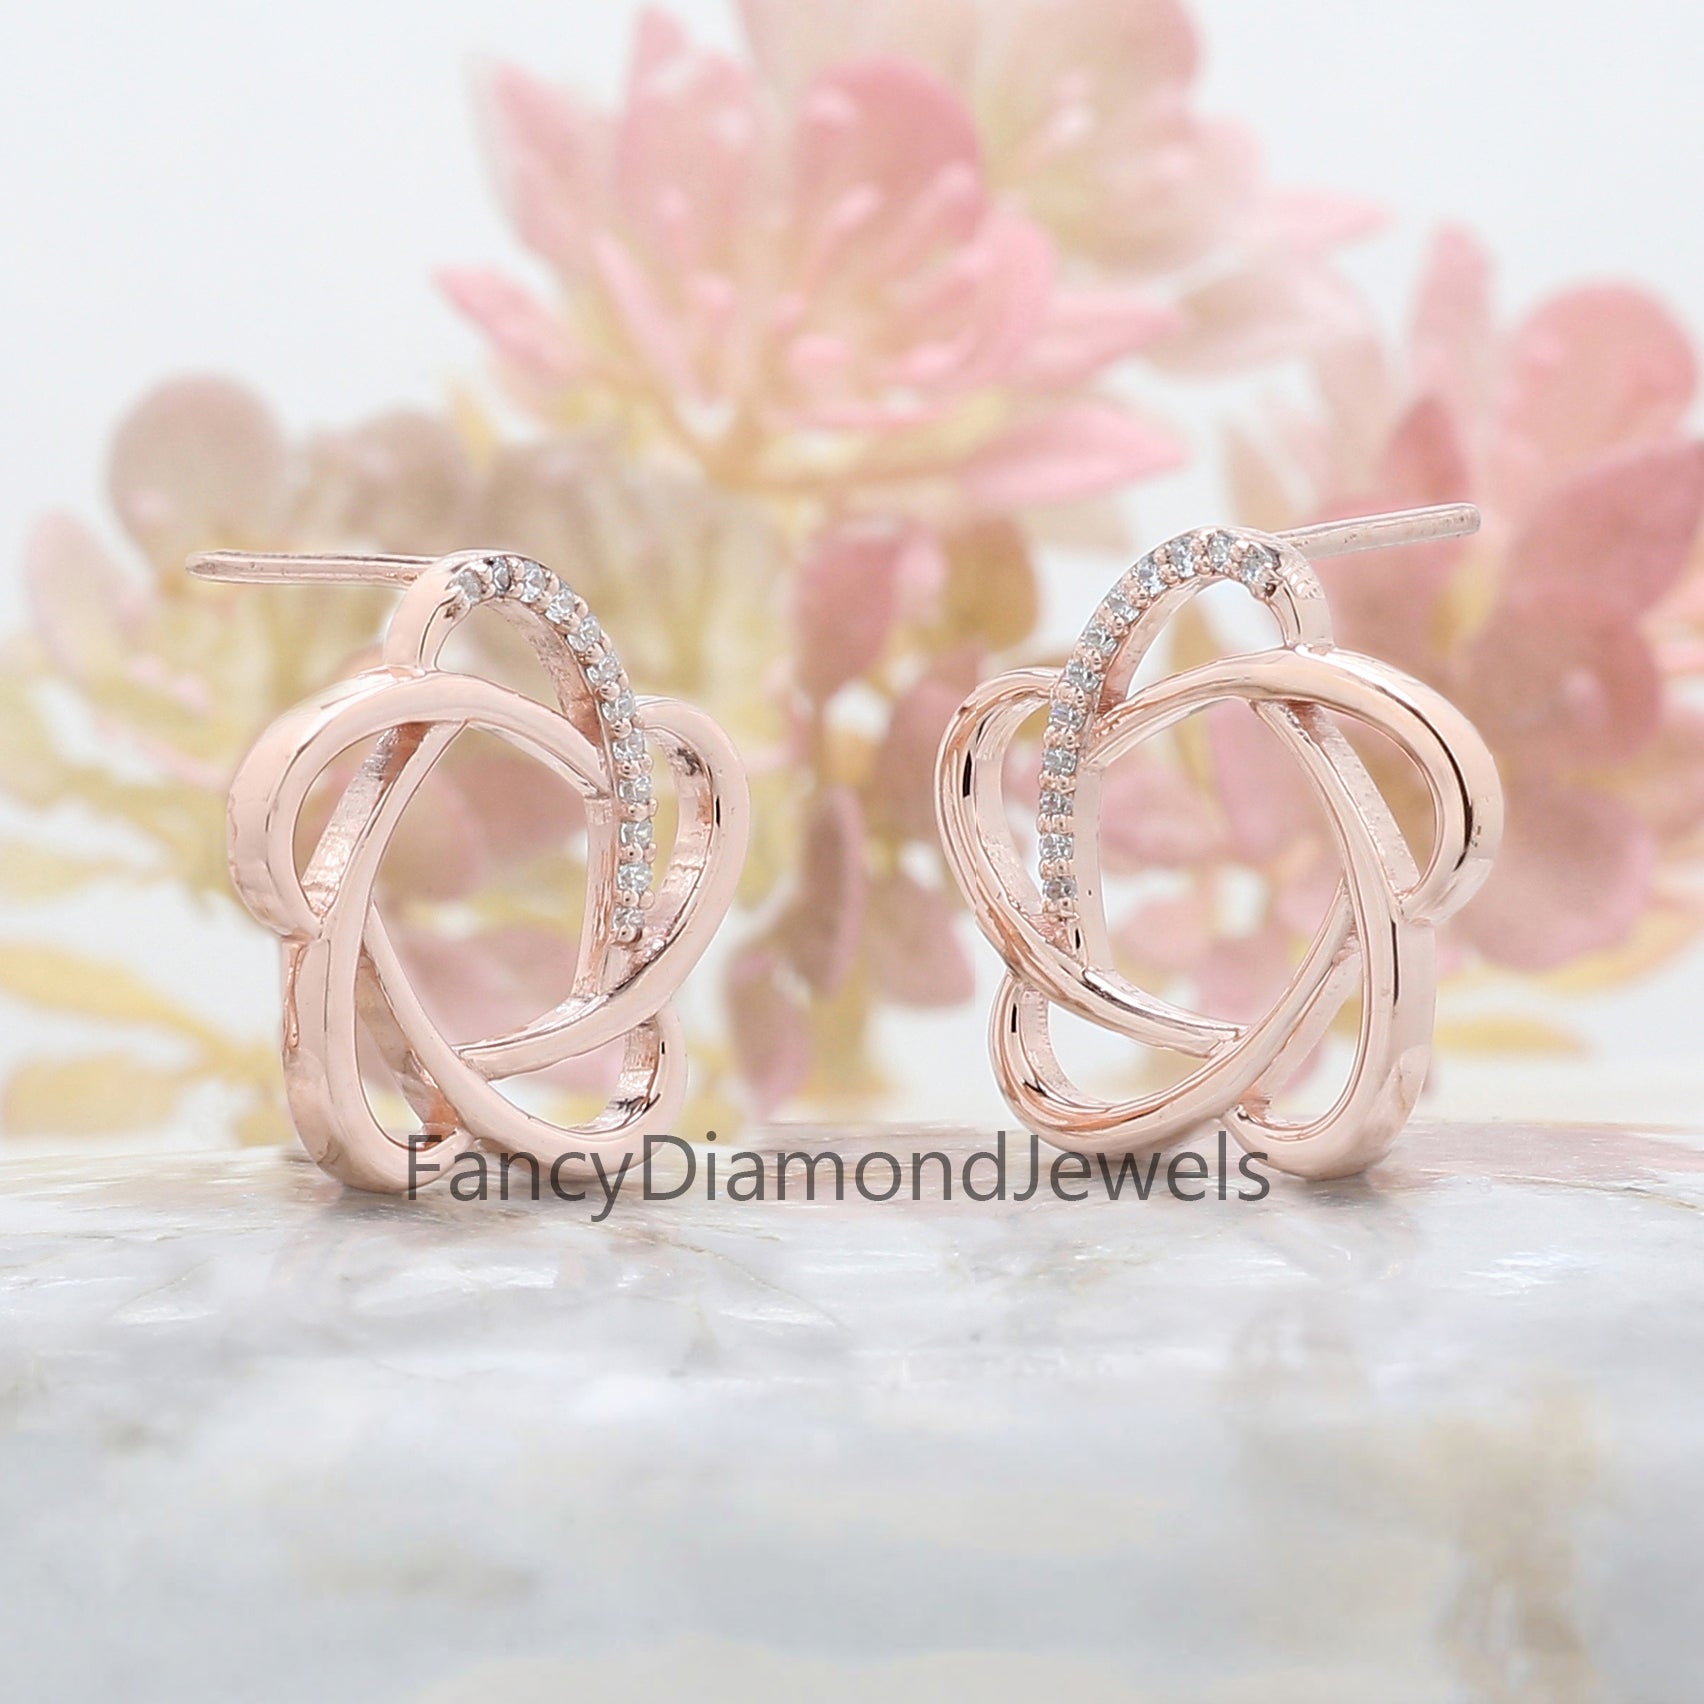 Round White Color Diamond Earring Engagement Wedding Gift Earring 14K Solid Rose White Yellow Gold Earring 0.14 CT KD986